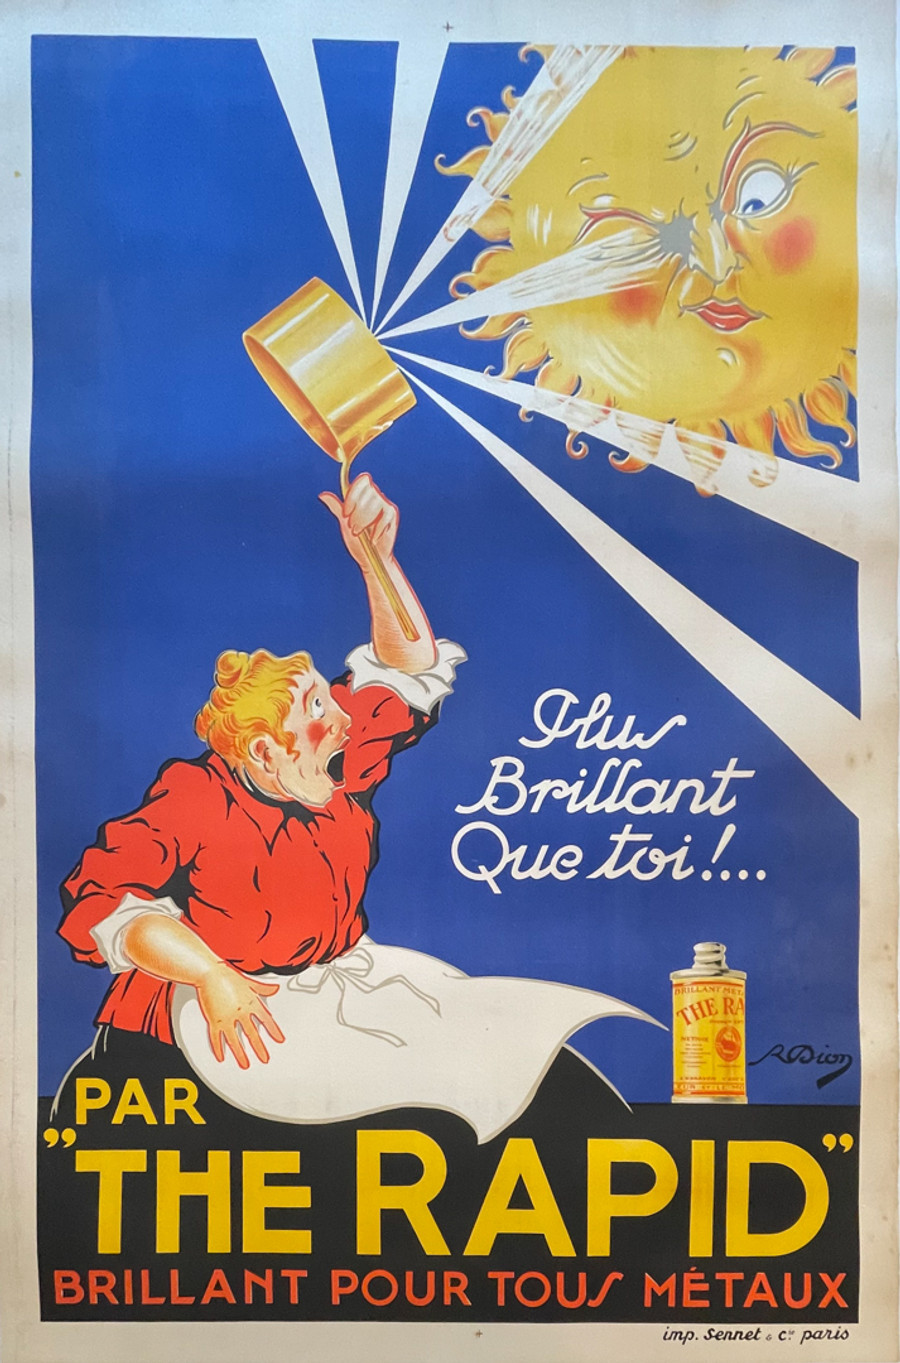 Rapid by Dion, original vintage French lithograph printed circa 1930 advertising a metal polish. The colorful ad represents that the polish blinds the sun. Condition notes: A- condition. Minor discoloration on border commensurate with age of the poster. Linen backed.